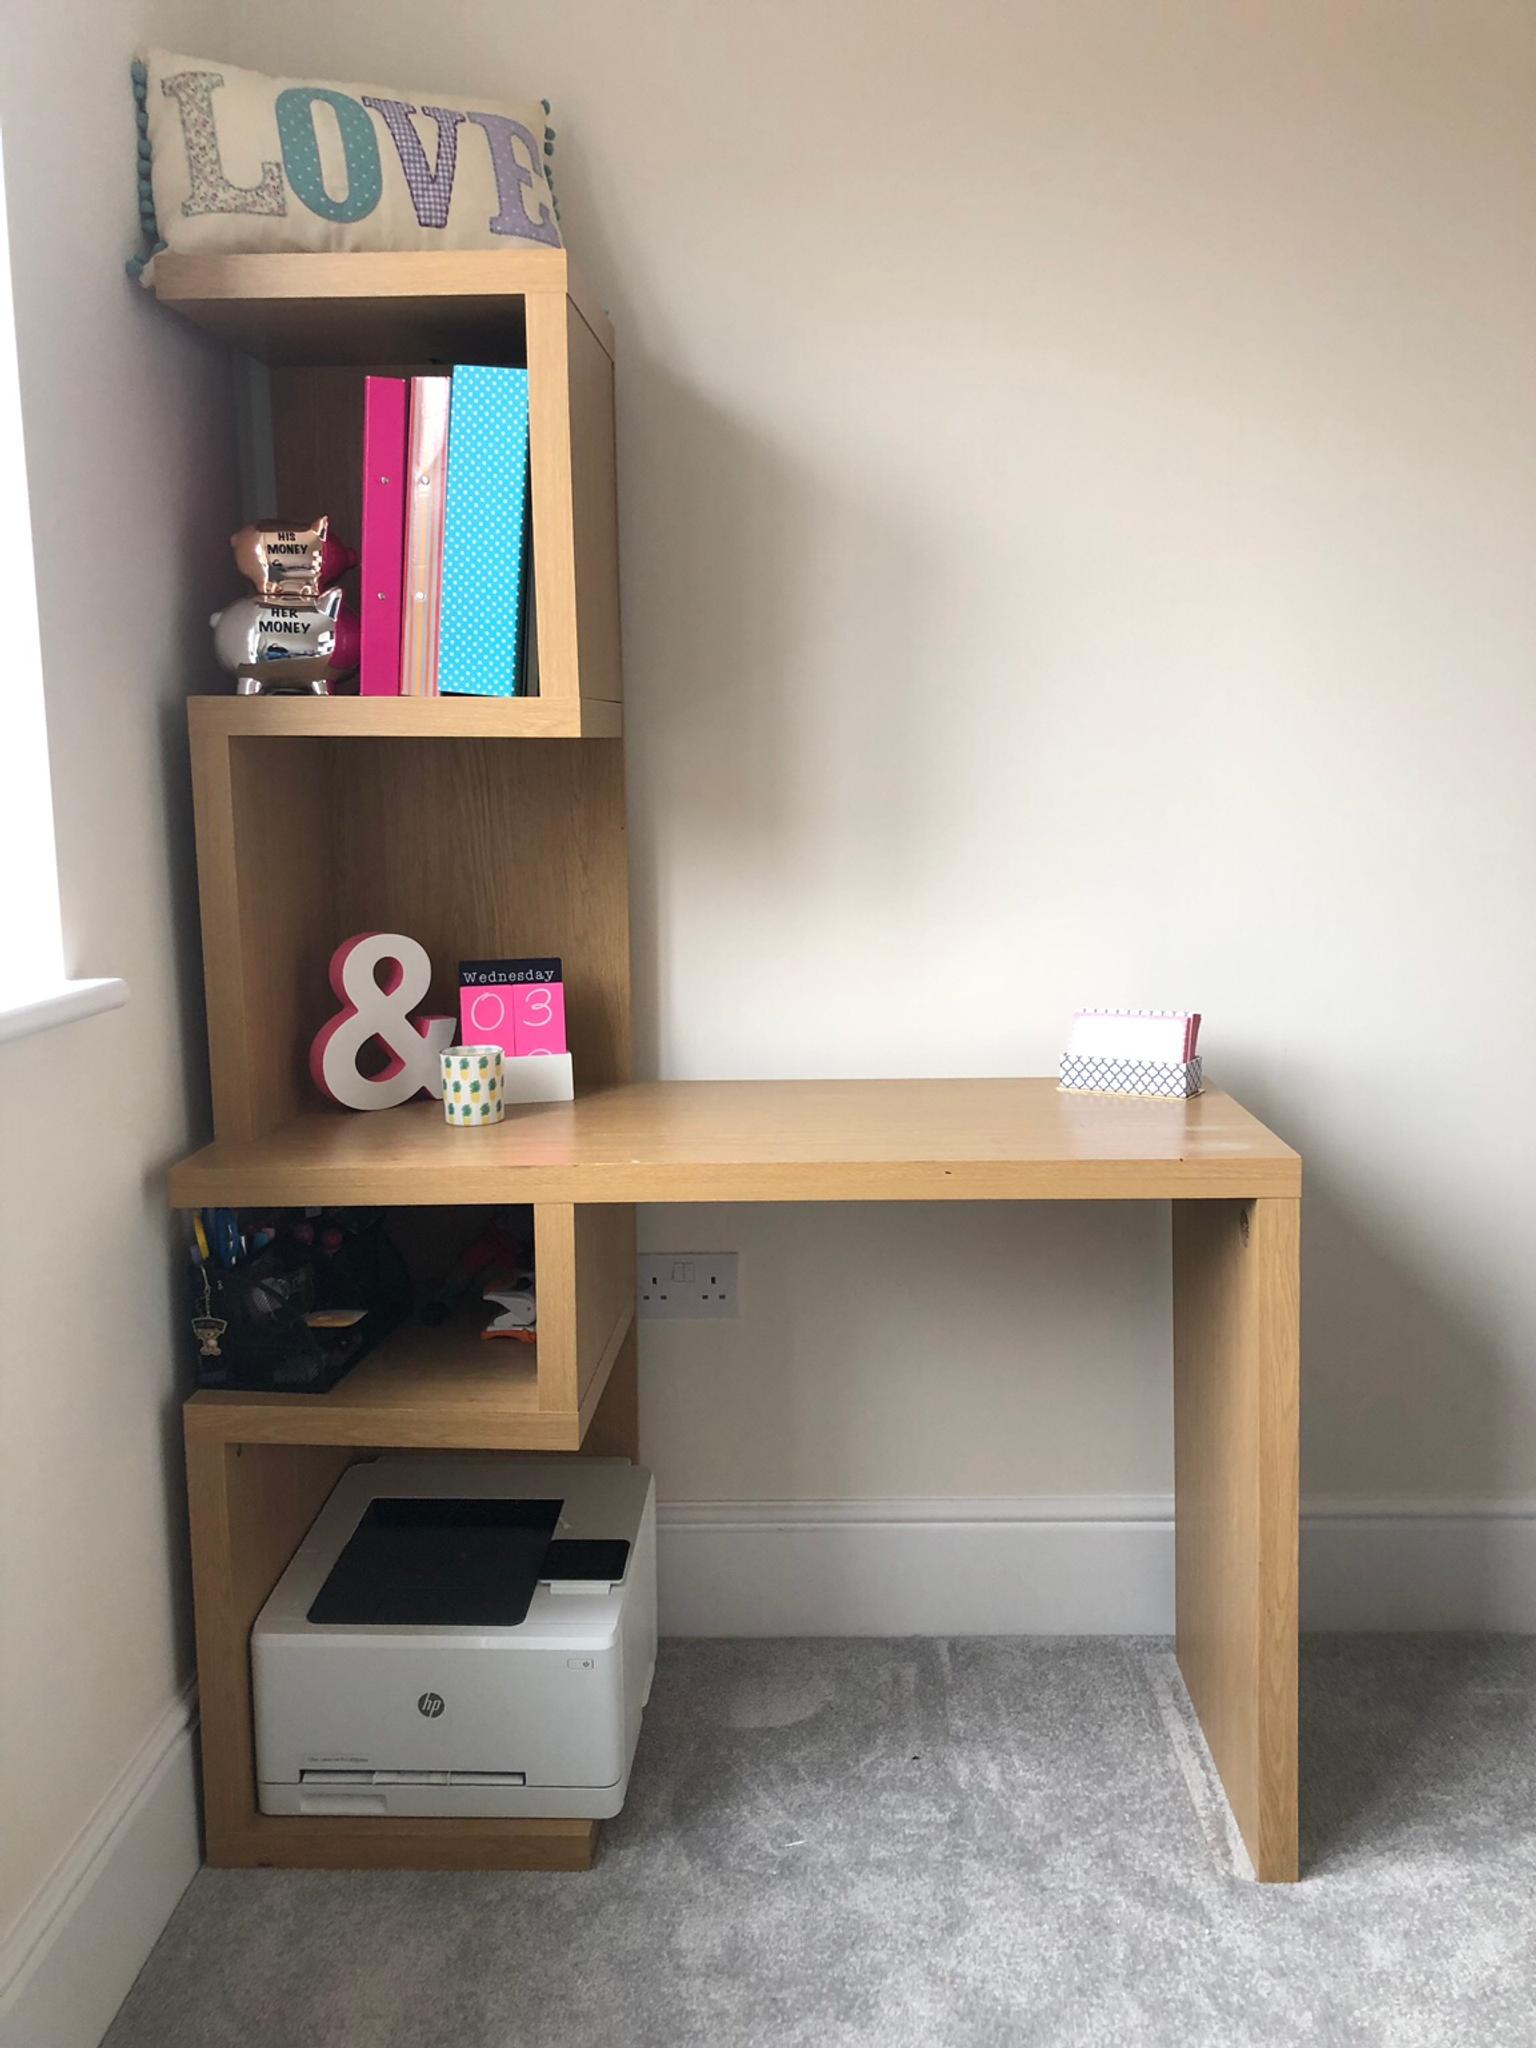 Next S Study Desk With Bookshelves Corsica In St16 Stafford For